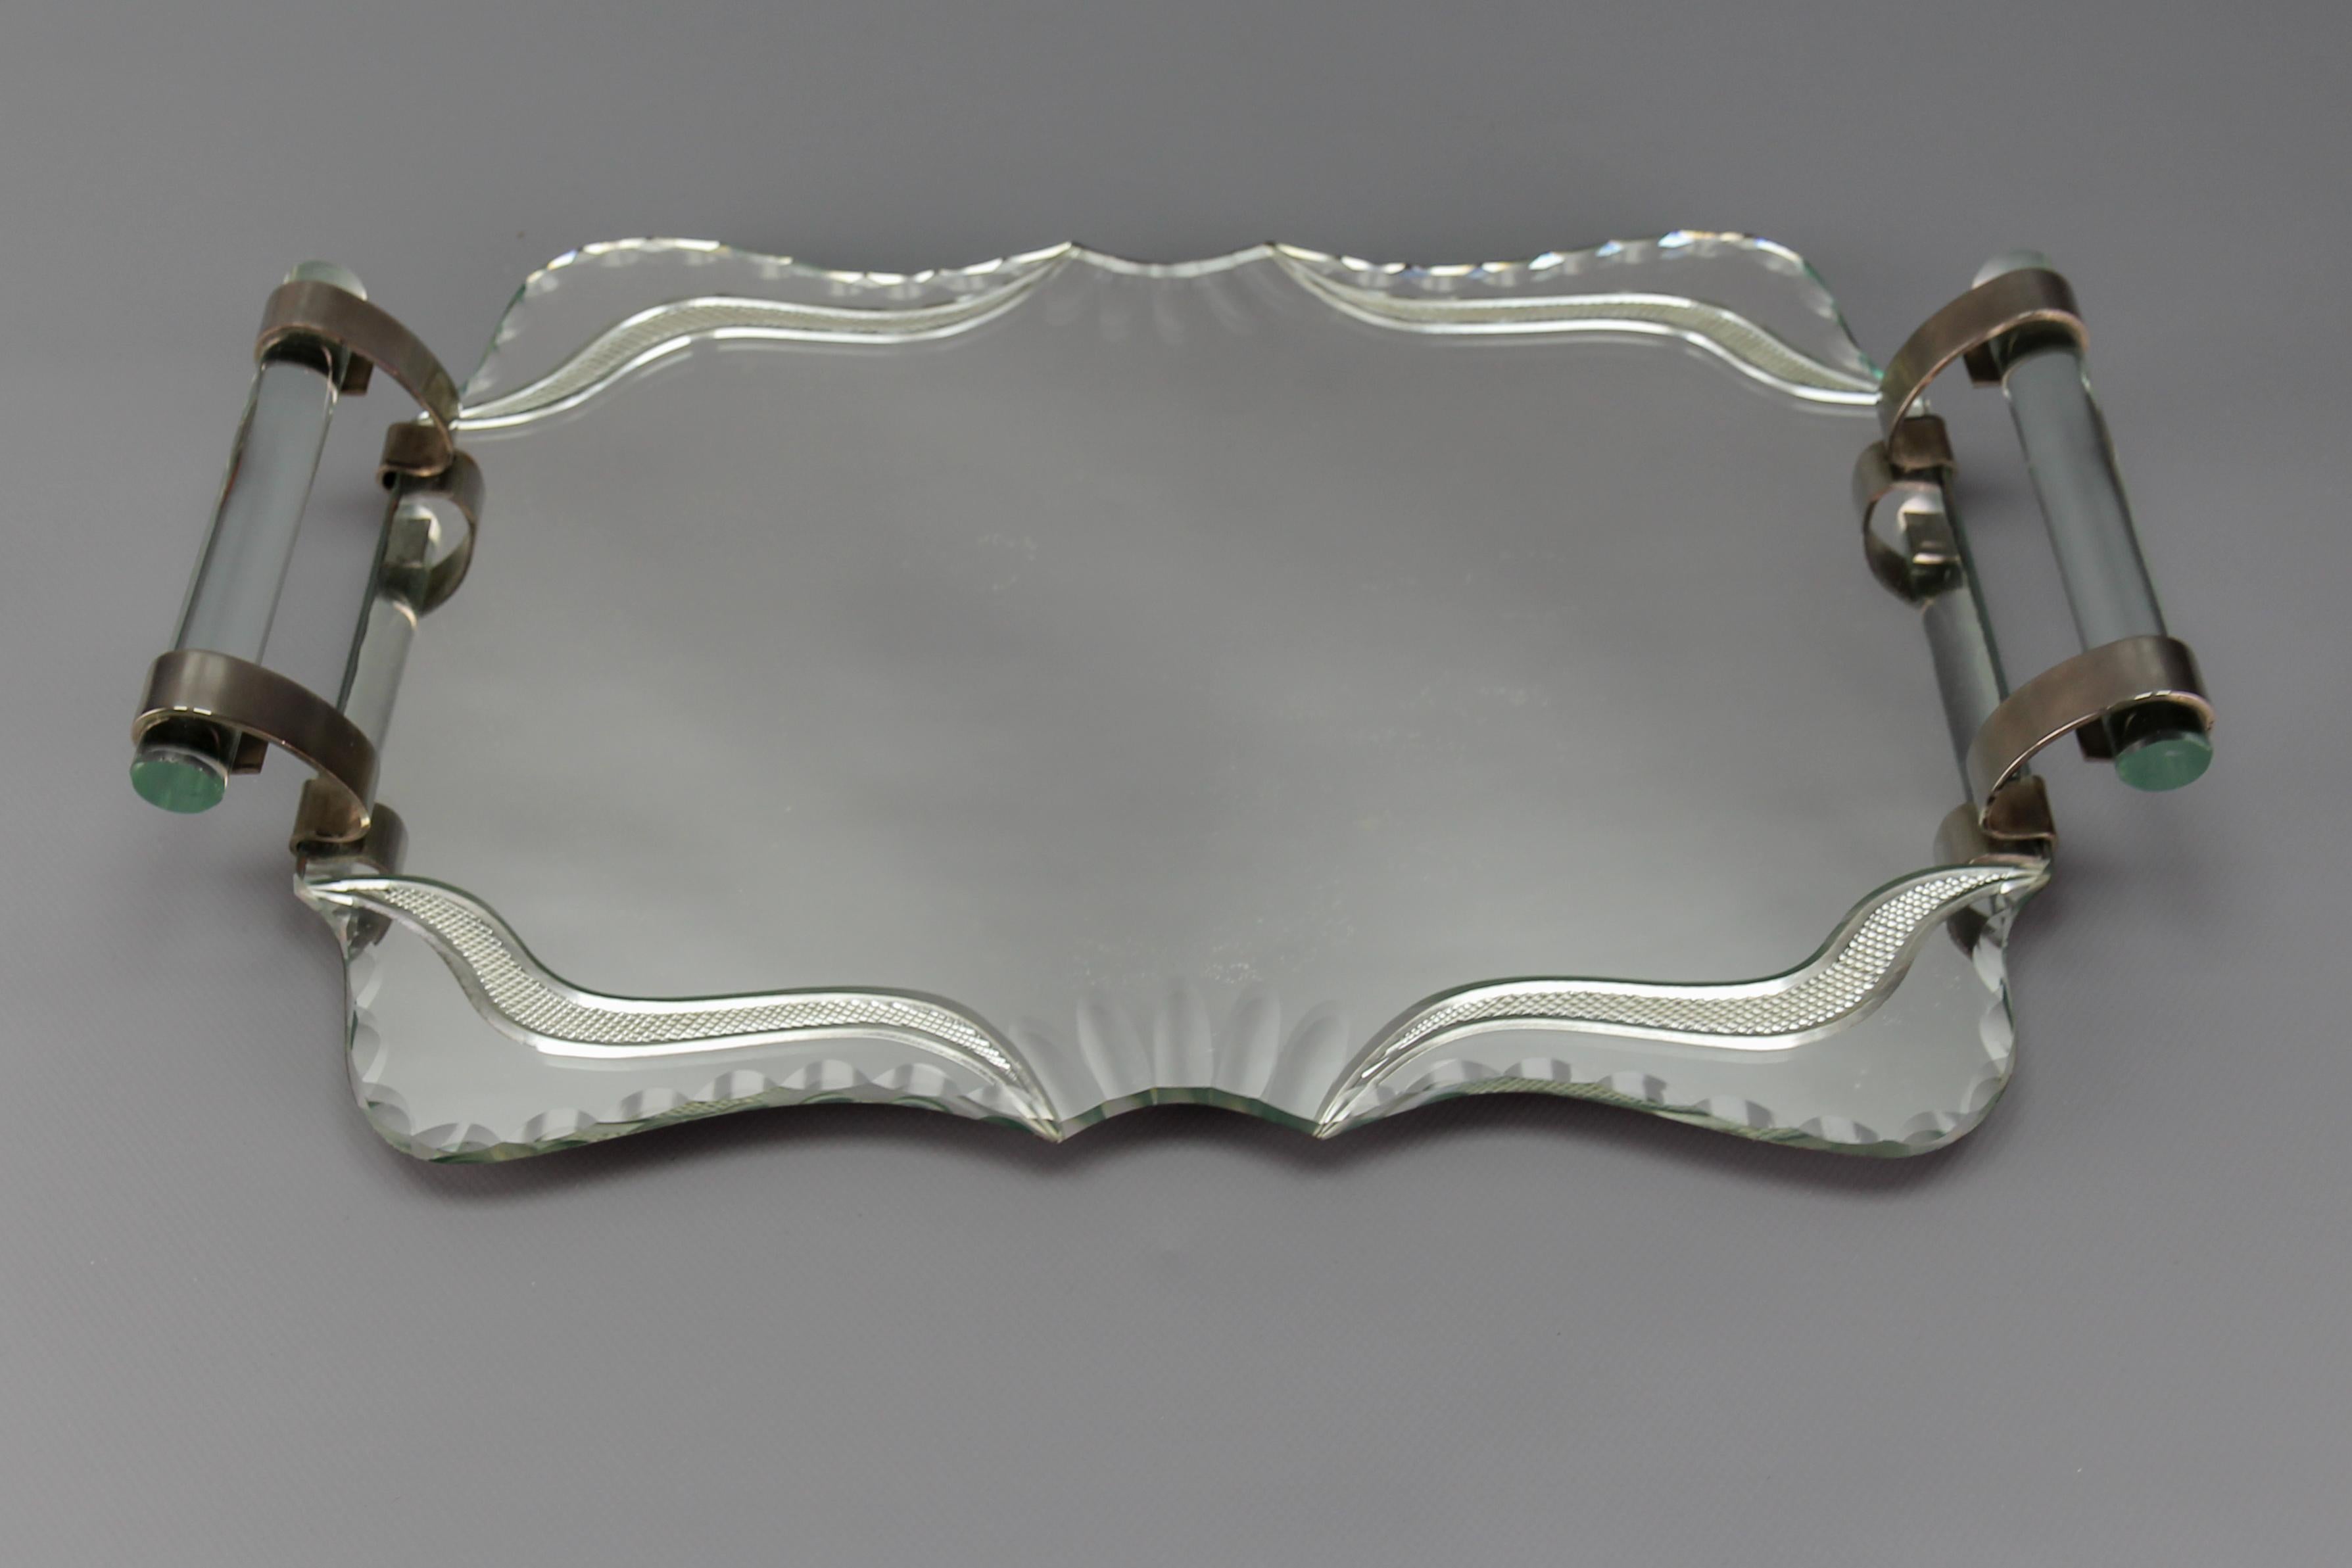 Art Deco cut Mirror, glass, and chrome serving tray, France, 1930s.
An elegant and classic Art Deco serving or bar tray made of a cut mirrored base with beveled details. Handles are made of thick glass and chromed aluminum.
Dimensions: height: 7 cm